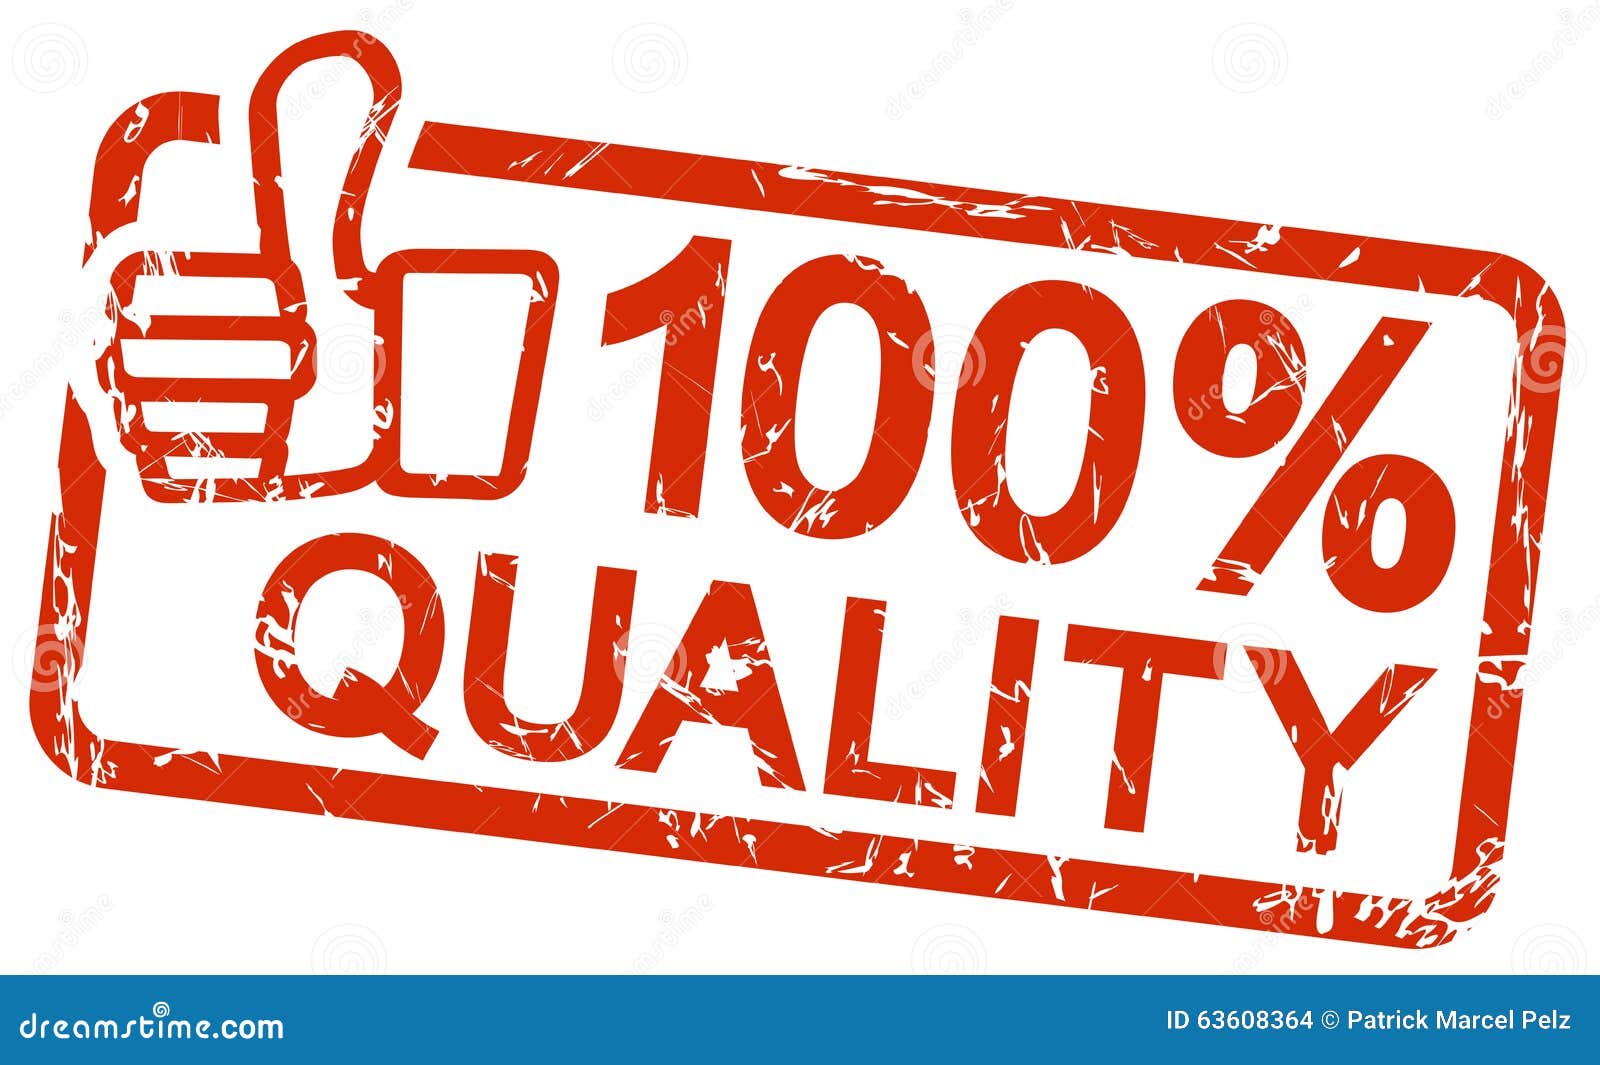 quality clipart free - photo #26